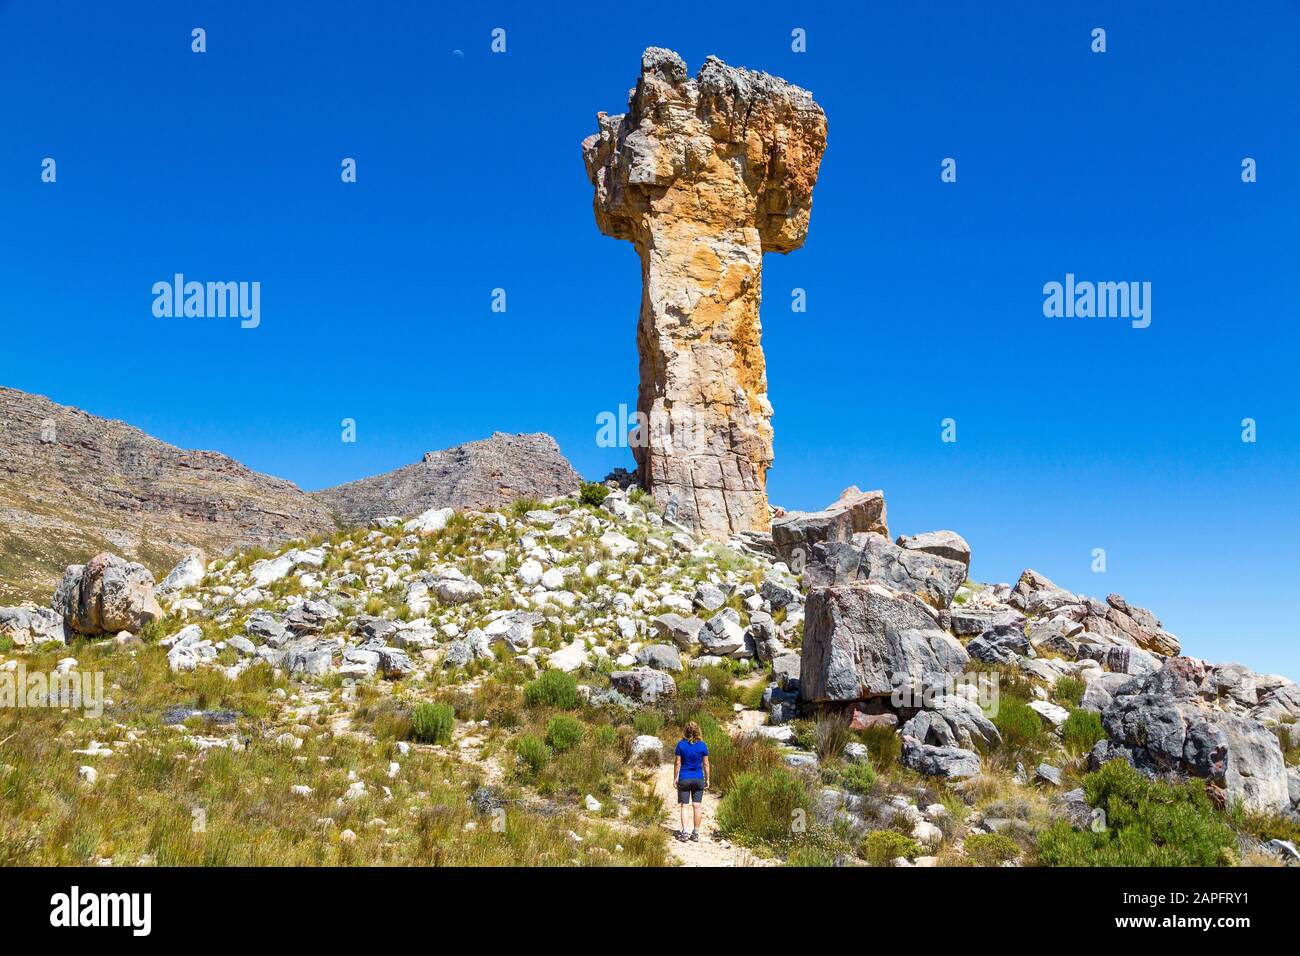 Woman looking at the rock formation Maltese Cross - a popular hiking destination in the Cederberg, South Africa Stock Photo